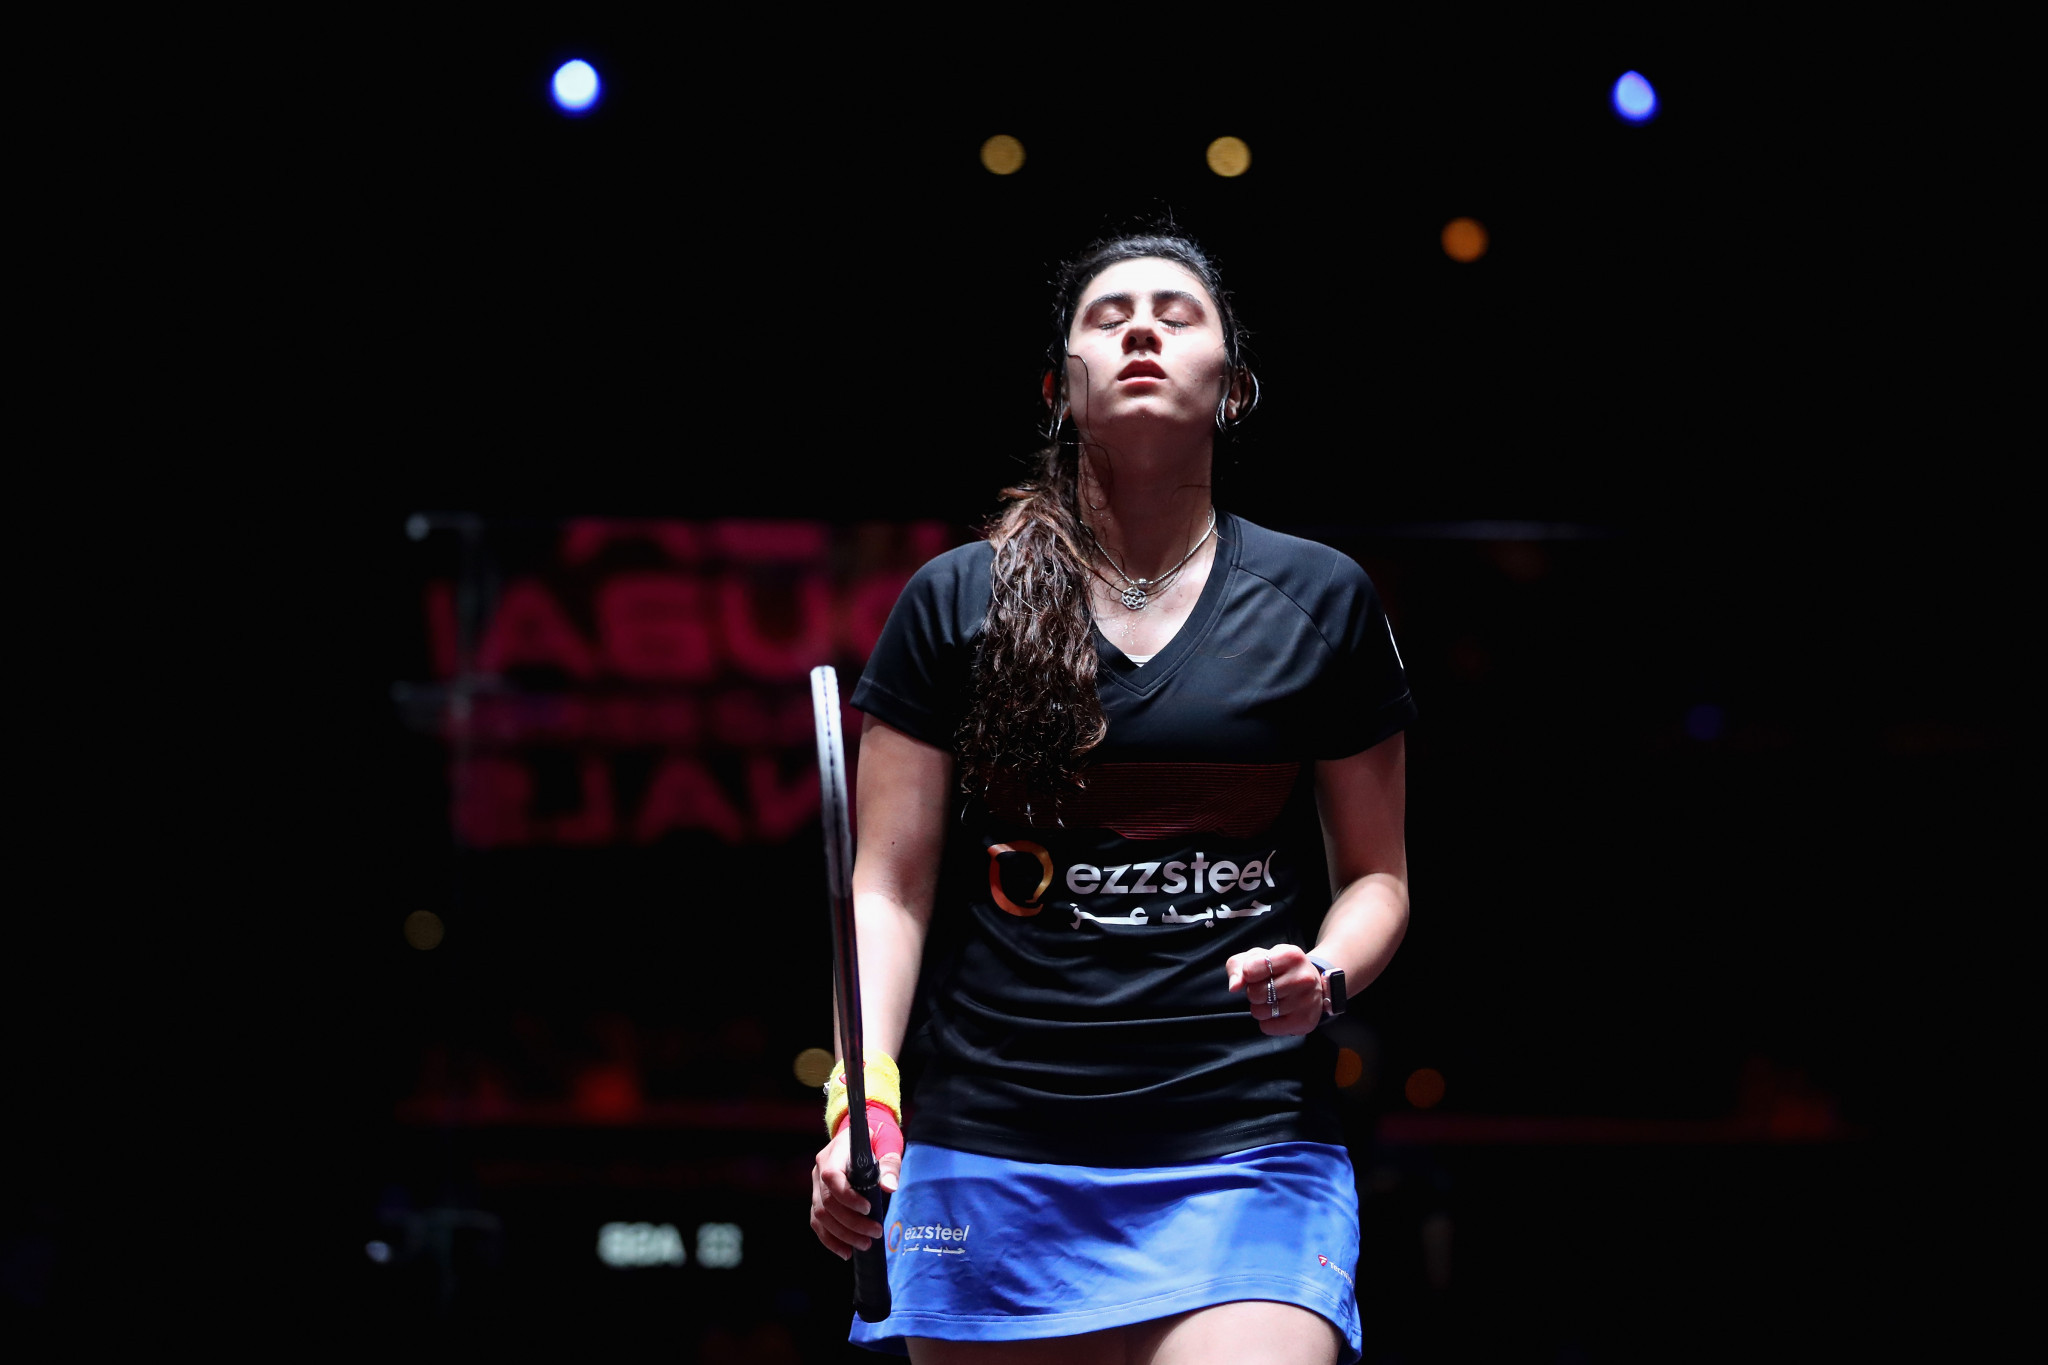 World number ones bid to defend titles at squash’s Windy City Open in first Platinum event of the year